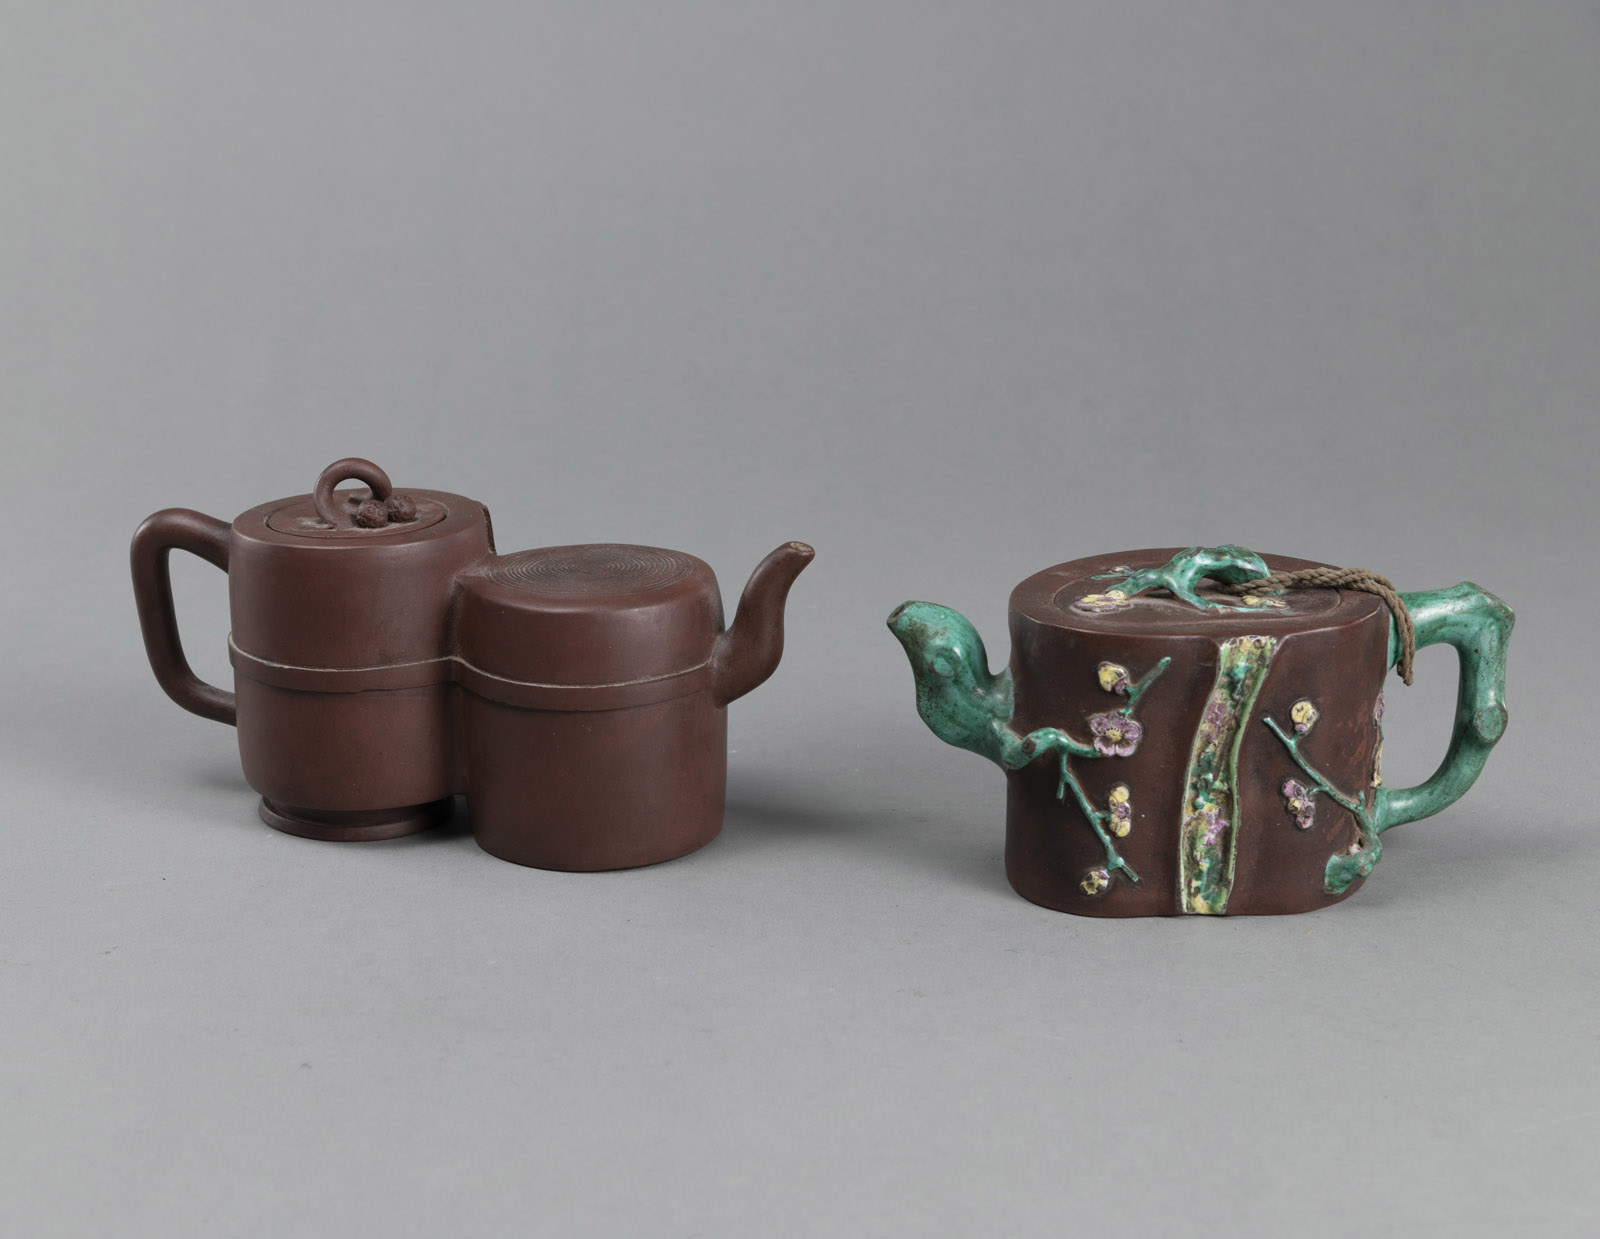 <b>TWO YIXING TEAPOTS IN THE SHAPE OF A DOUBLE VESSEL AND A PLUM TREE TRUNK, PARTLY PAINTED</b>